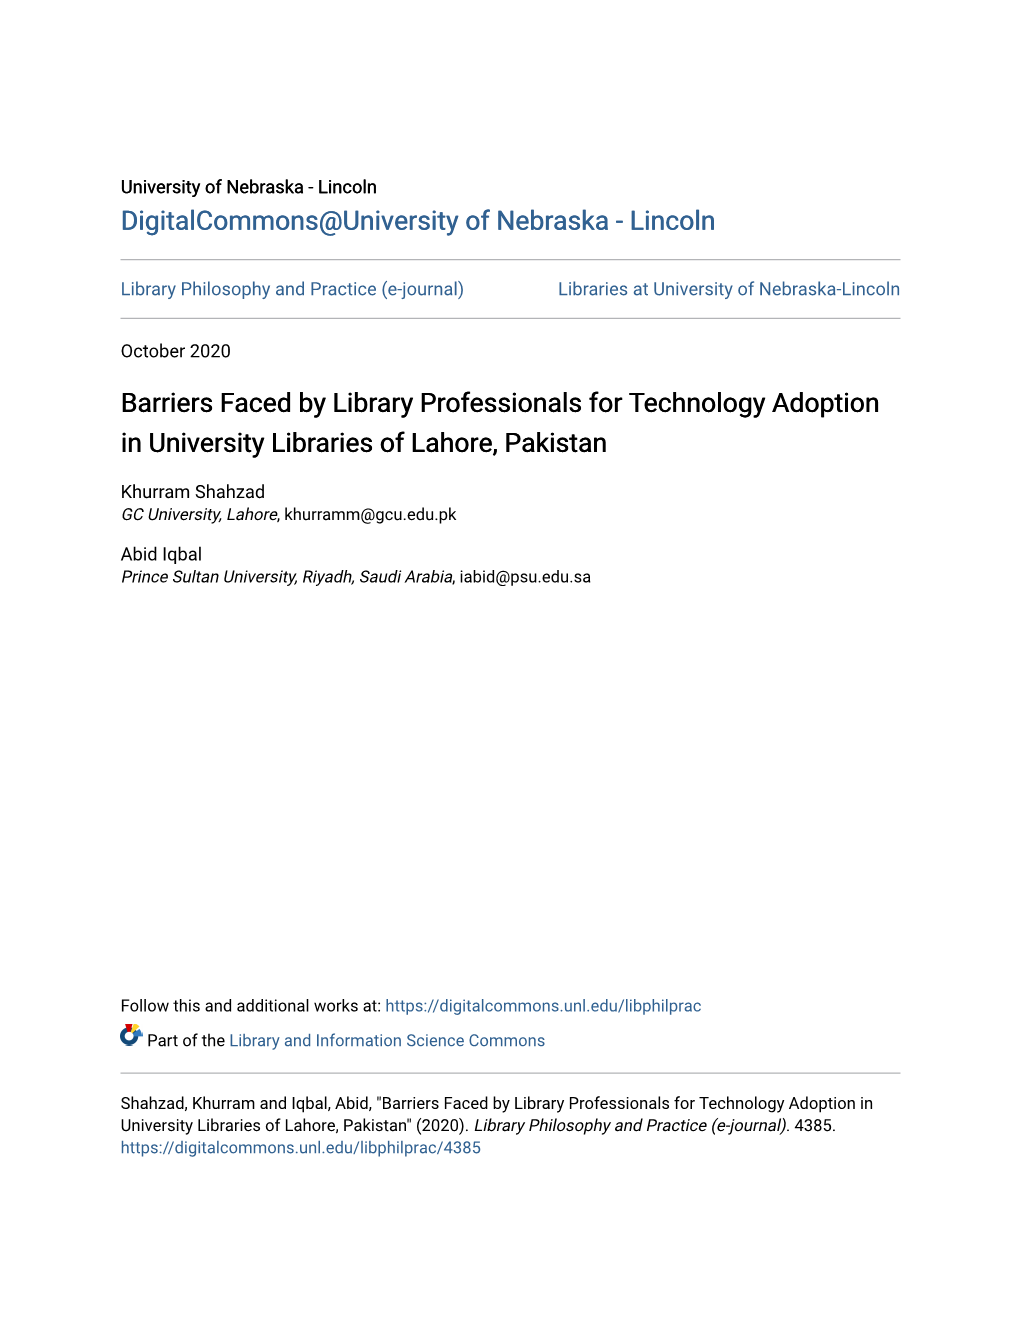 Barriers Faced by Library Professionals for Technology Adoption in University Libraries of Lahore, Pakistan